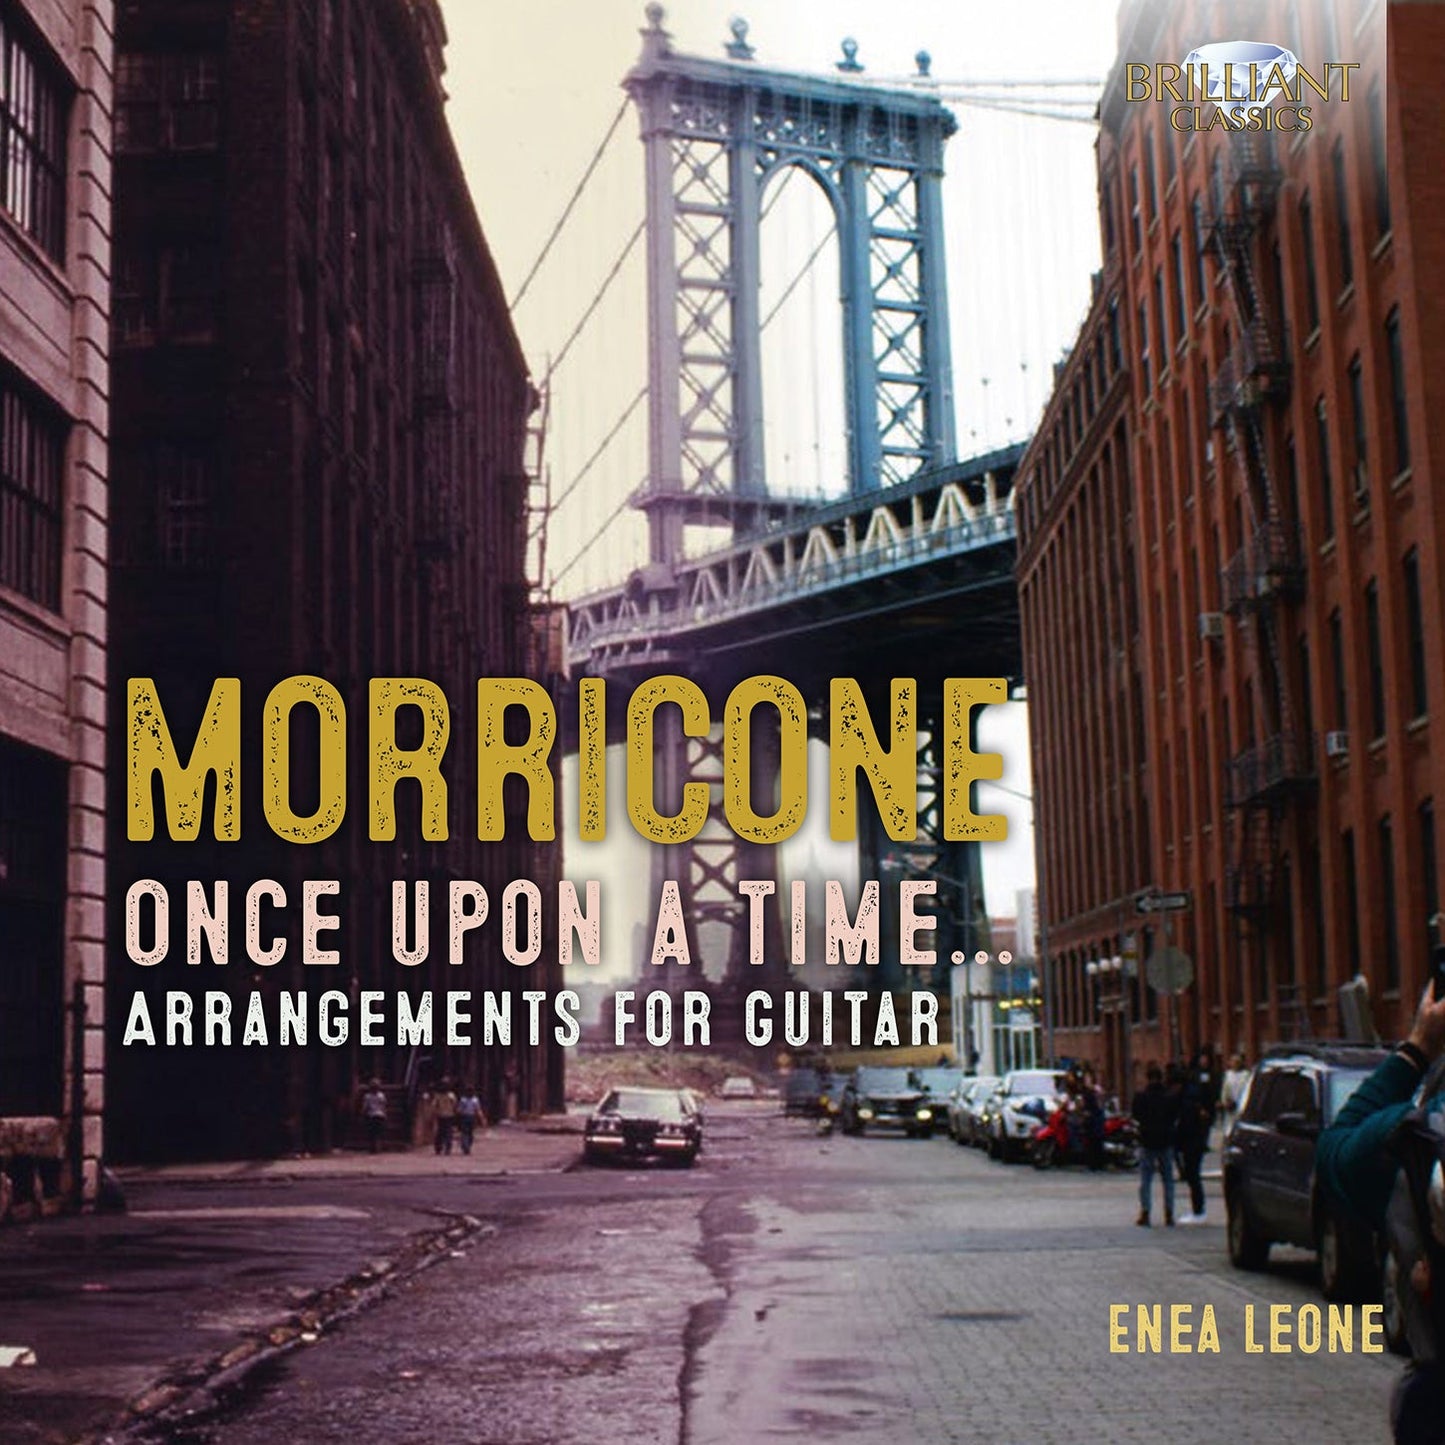 Morricone: Once Upon a Time - Arrangements for Guitar